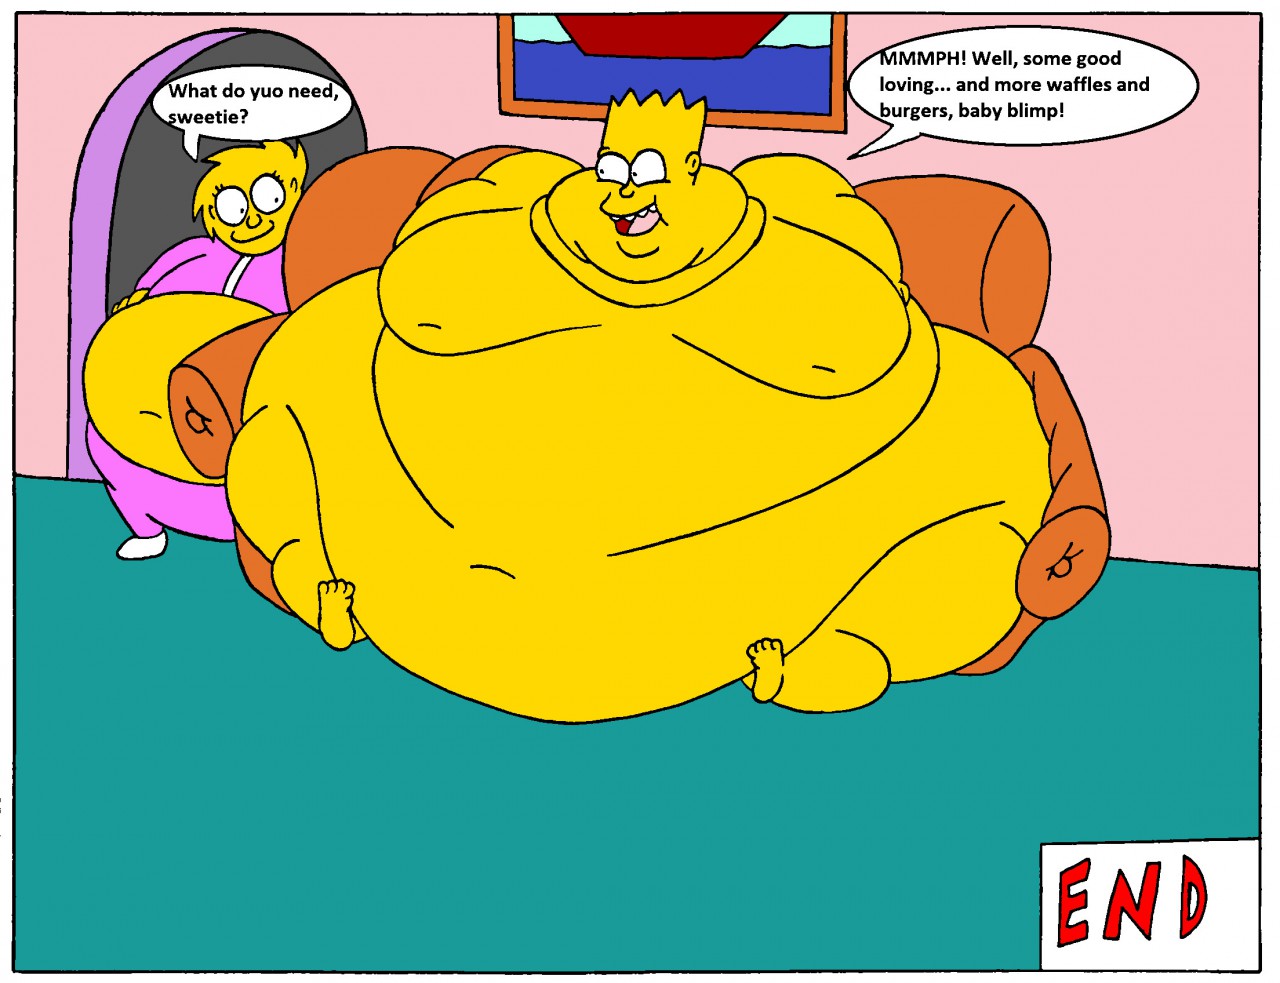 Fat Bart page 6 END. 